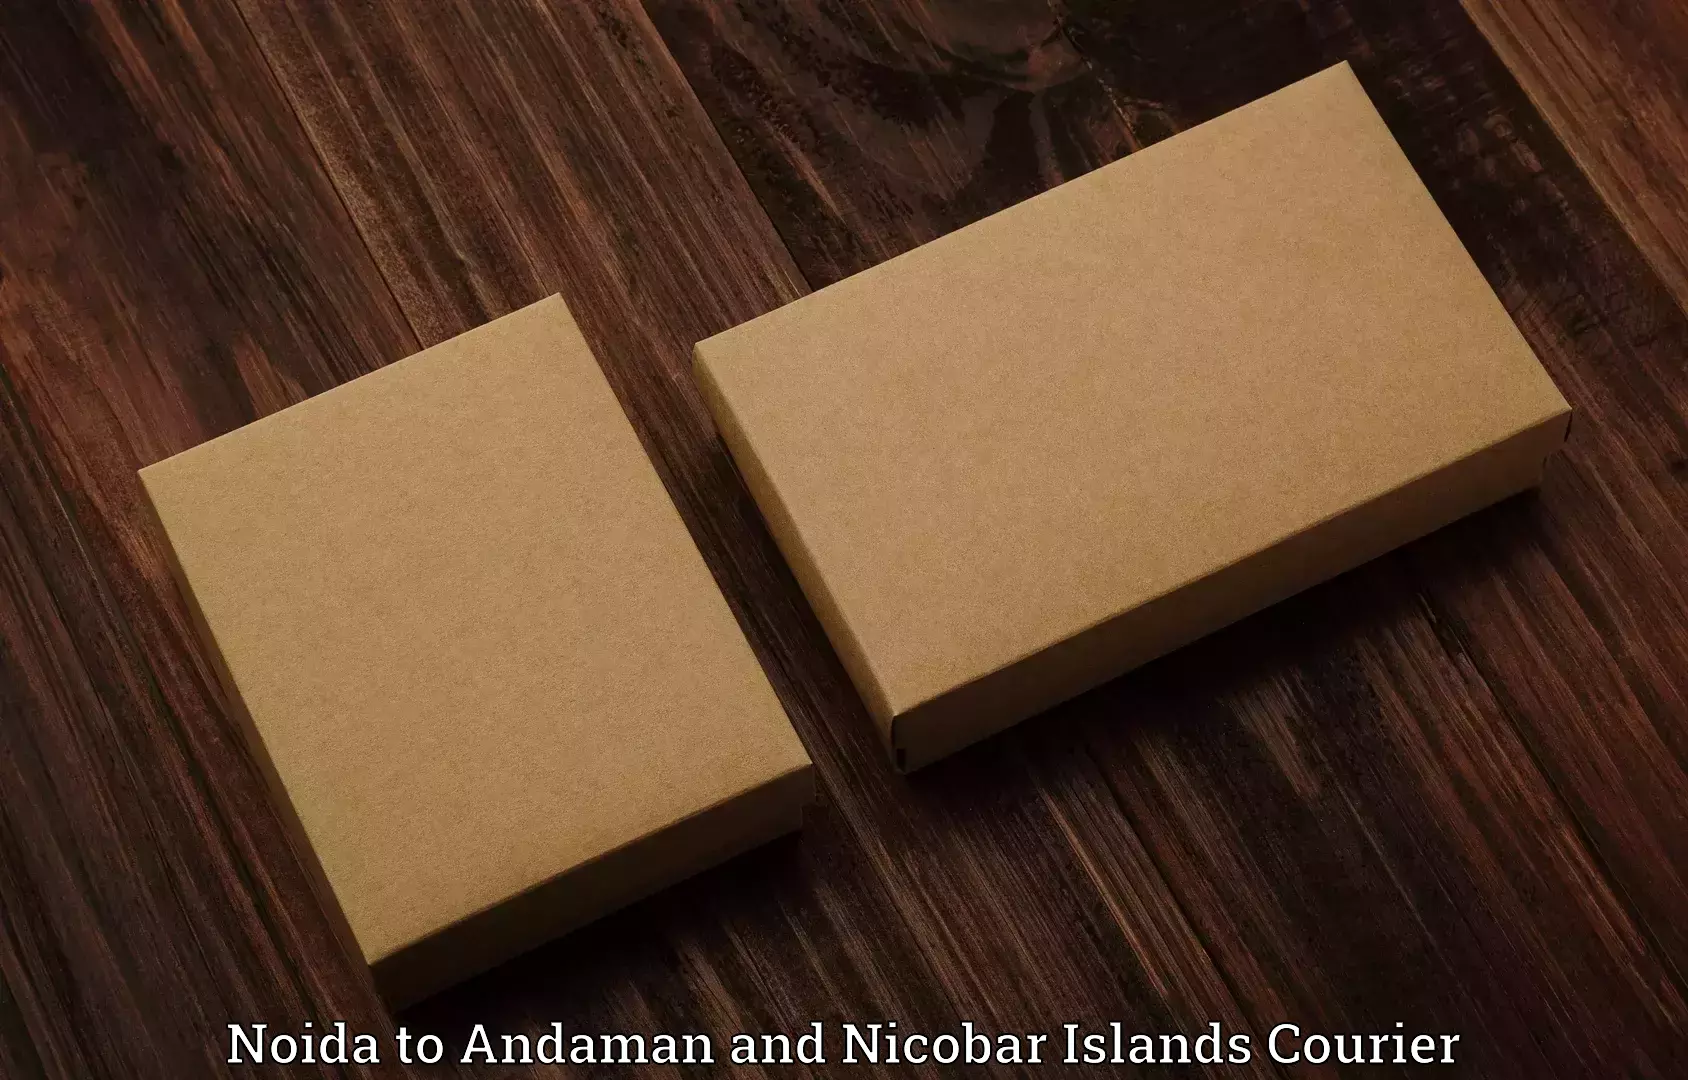 Luggage transport consultancy Noida to Andaman and Nicobar Islands